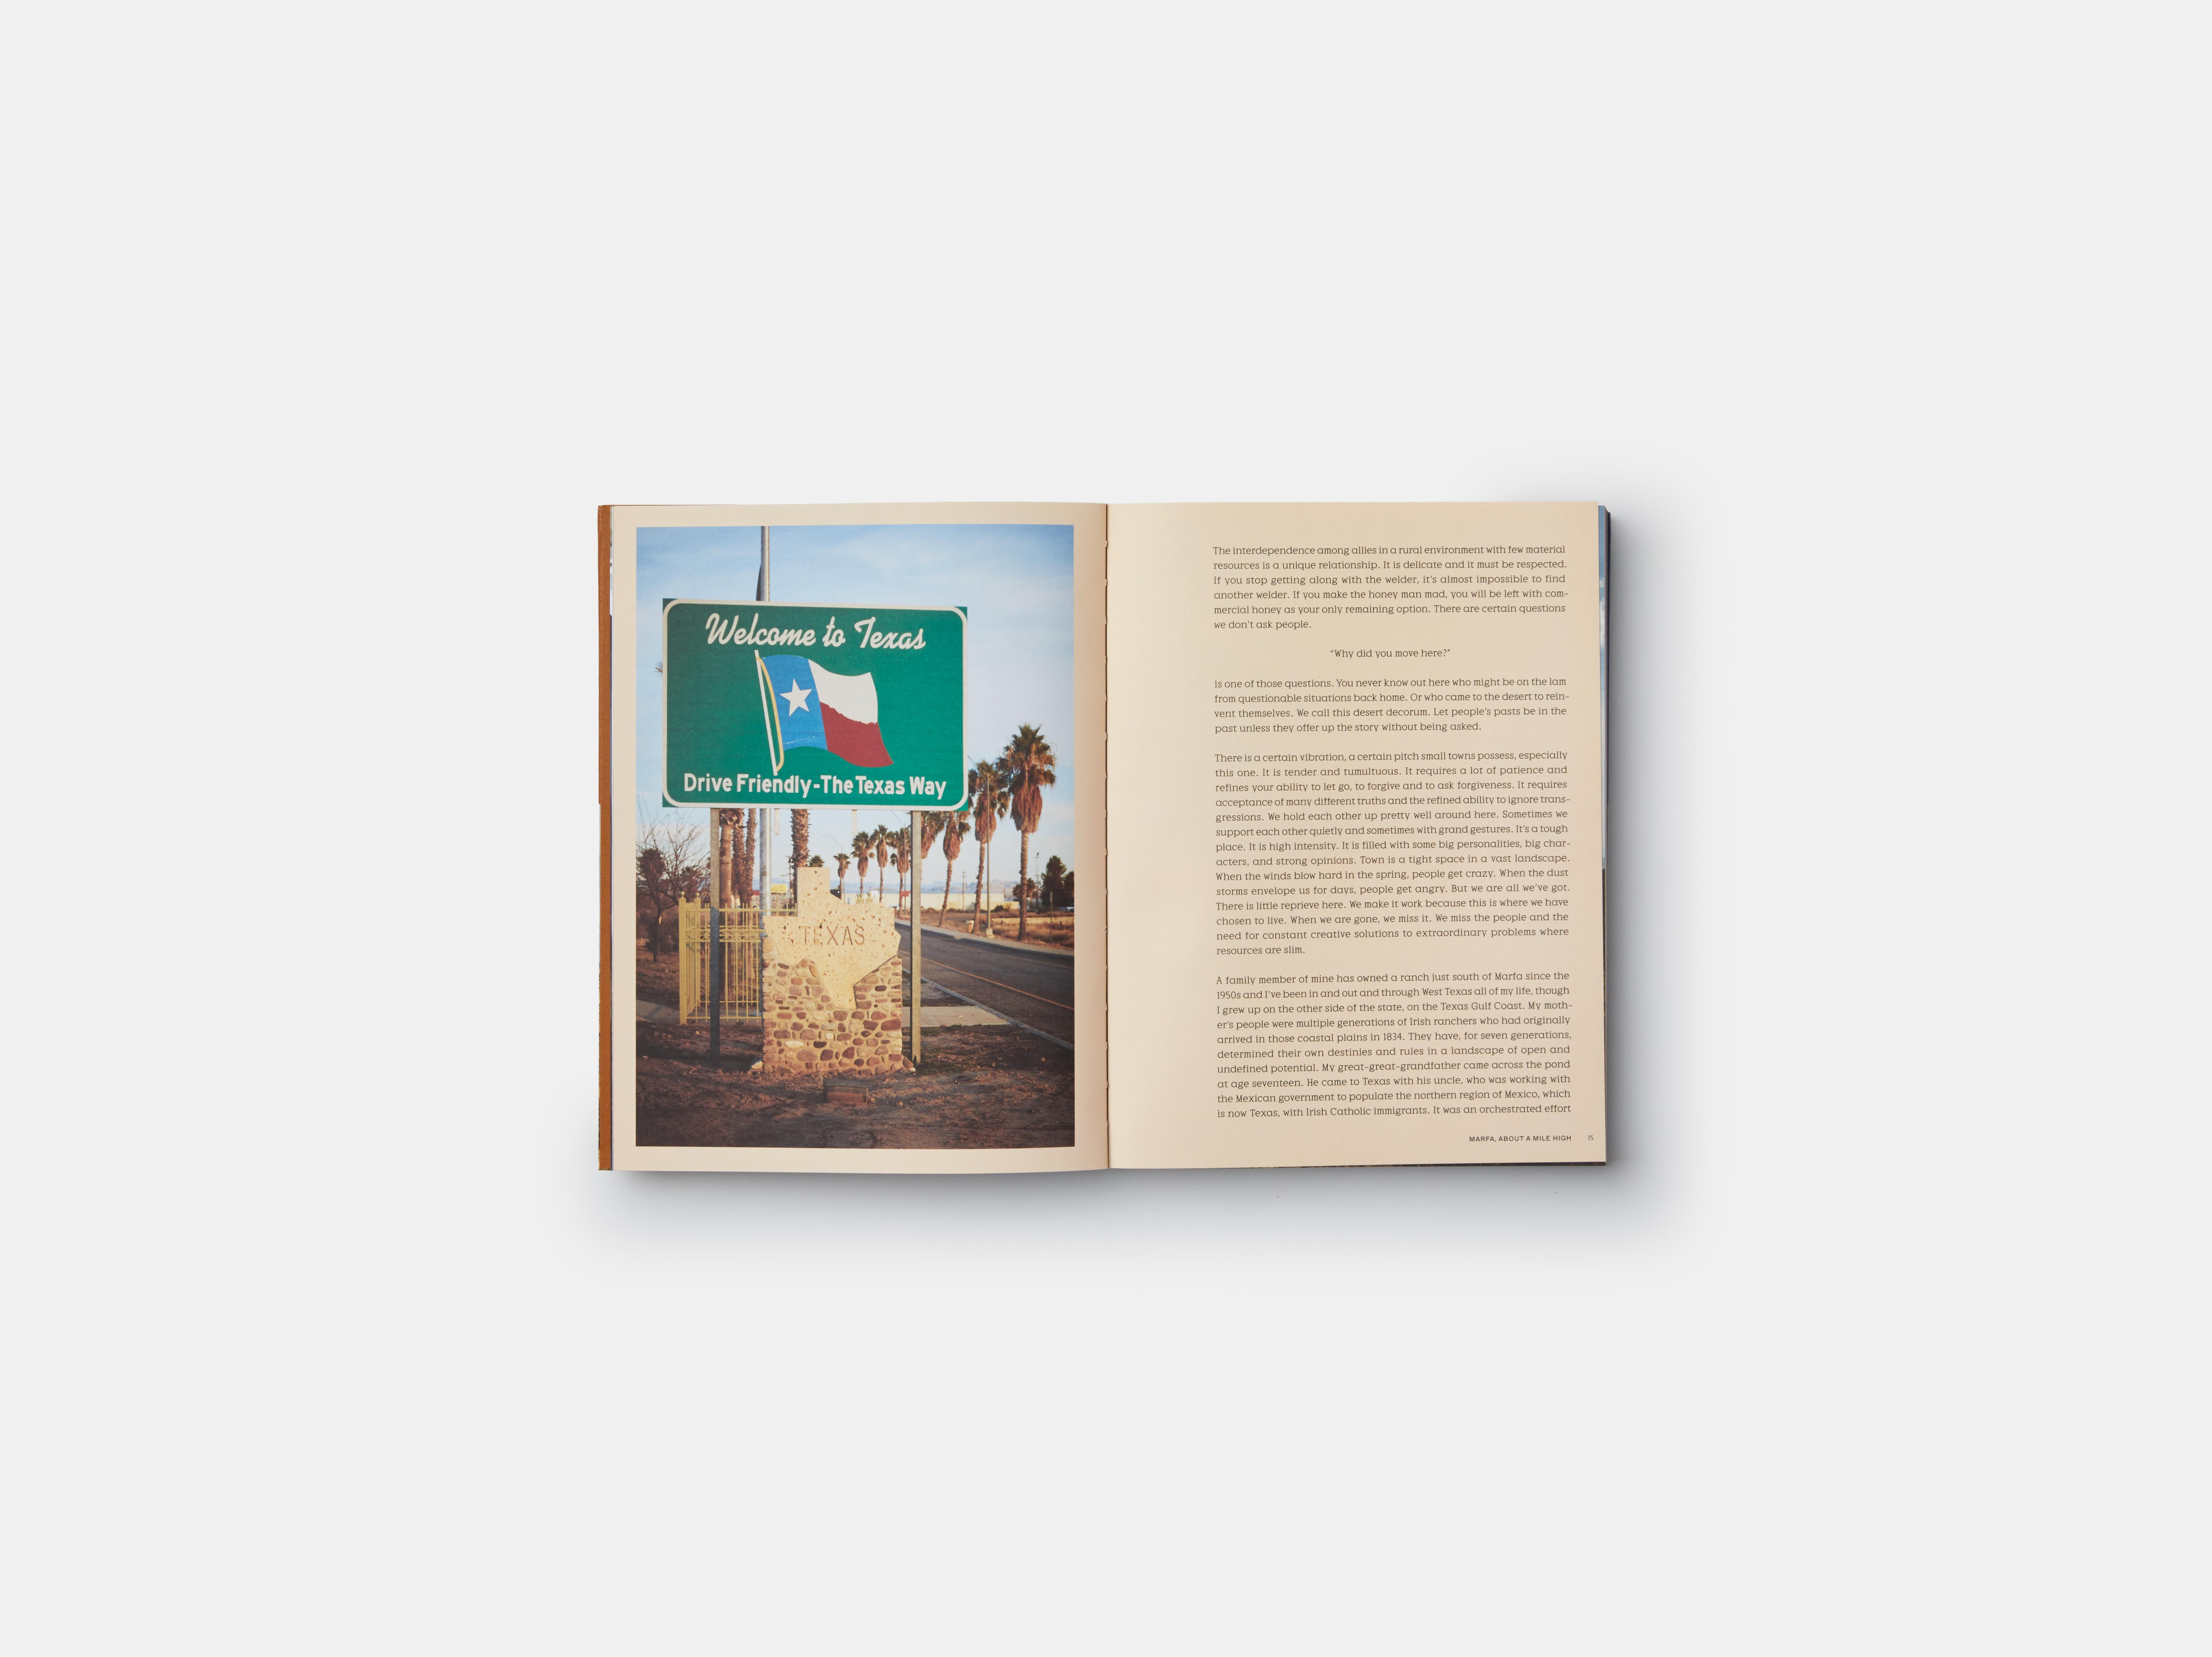 A treasure trove of essays, recipes, and images exploring the people and food of Marfa and its premier restaurant, The Capri

Cooking in Marfa introduces an unusual small town in the West Texas desert and, within it, a fine-dining oasis in a most